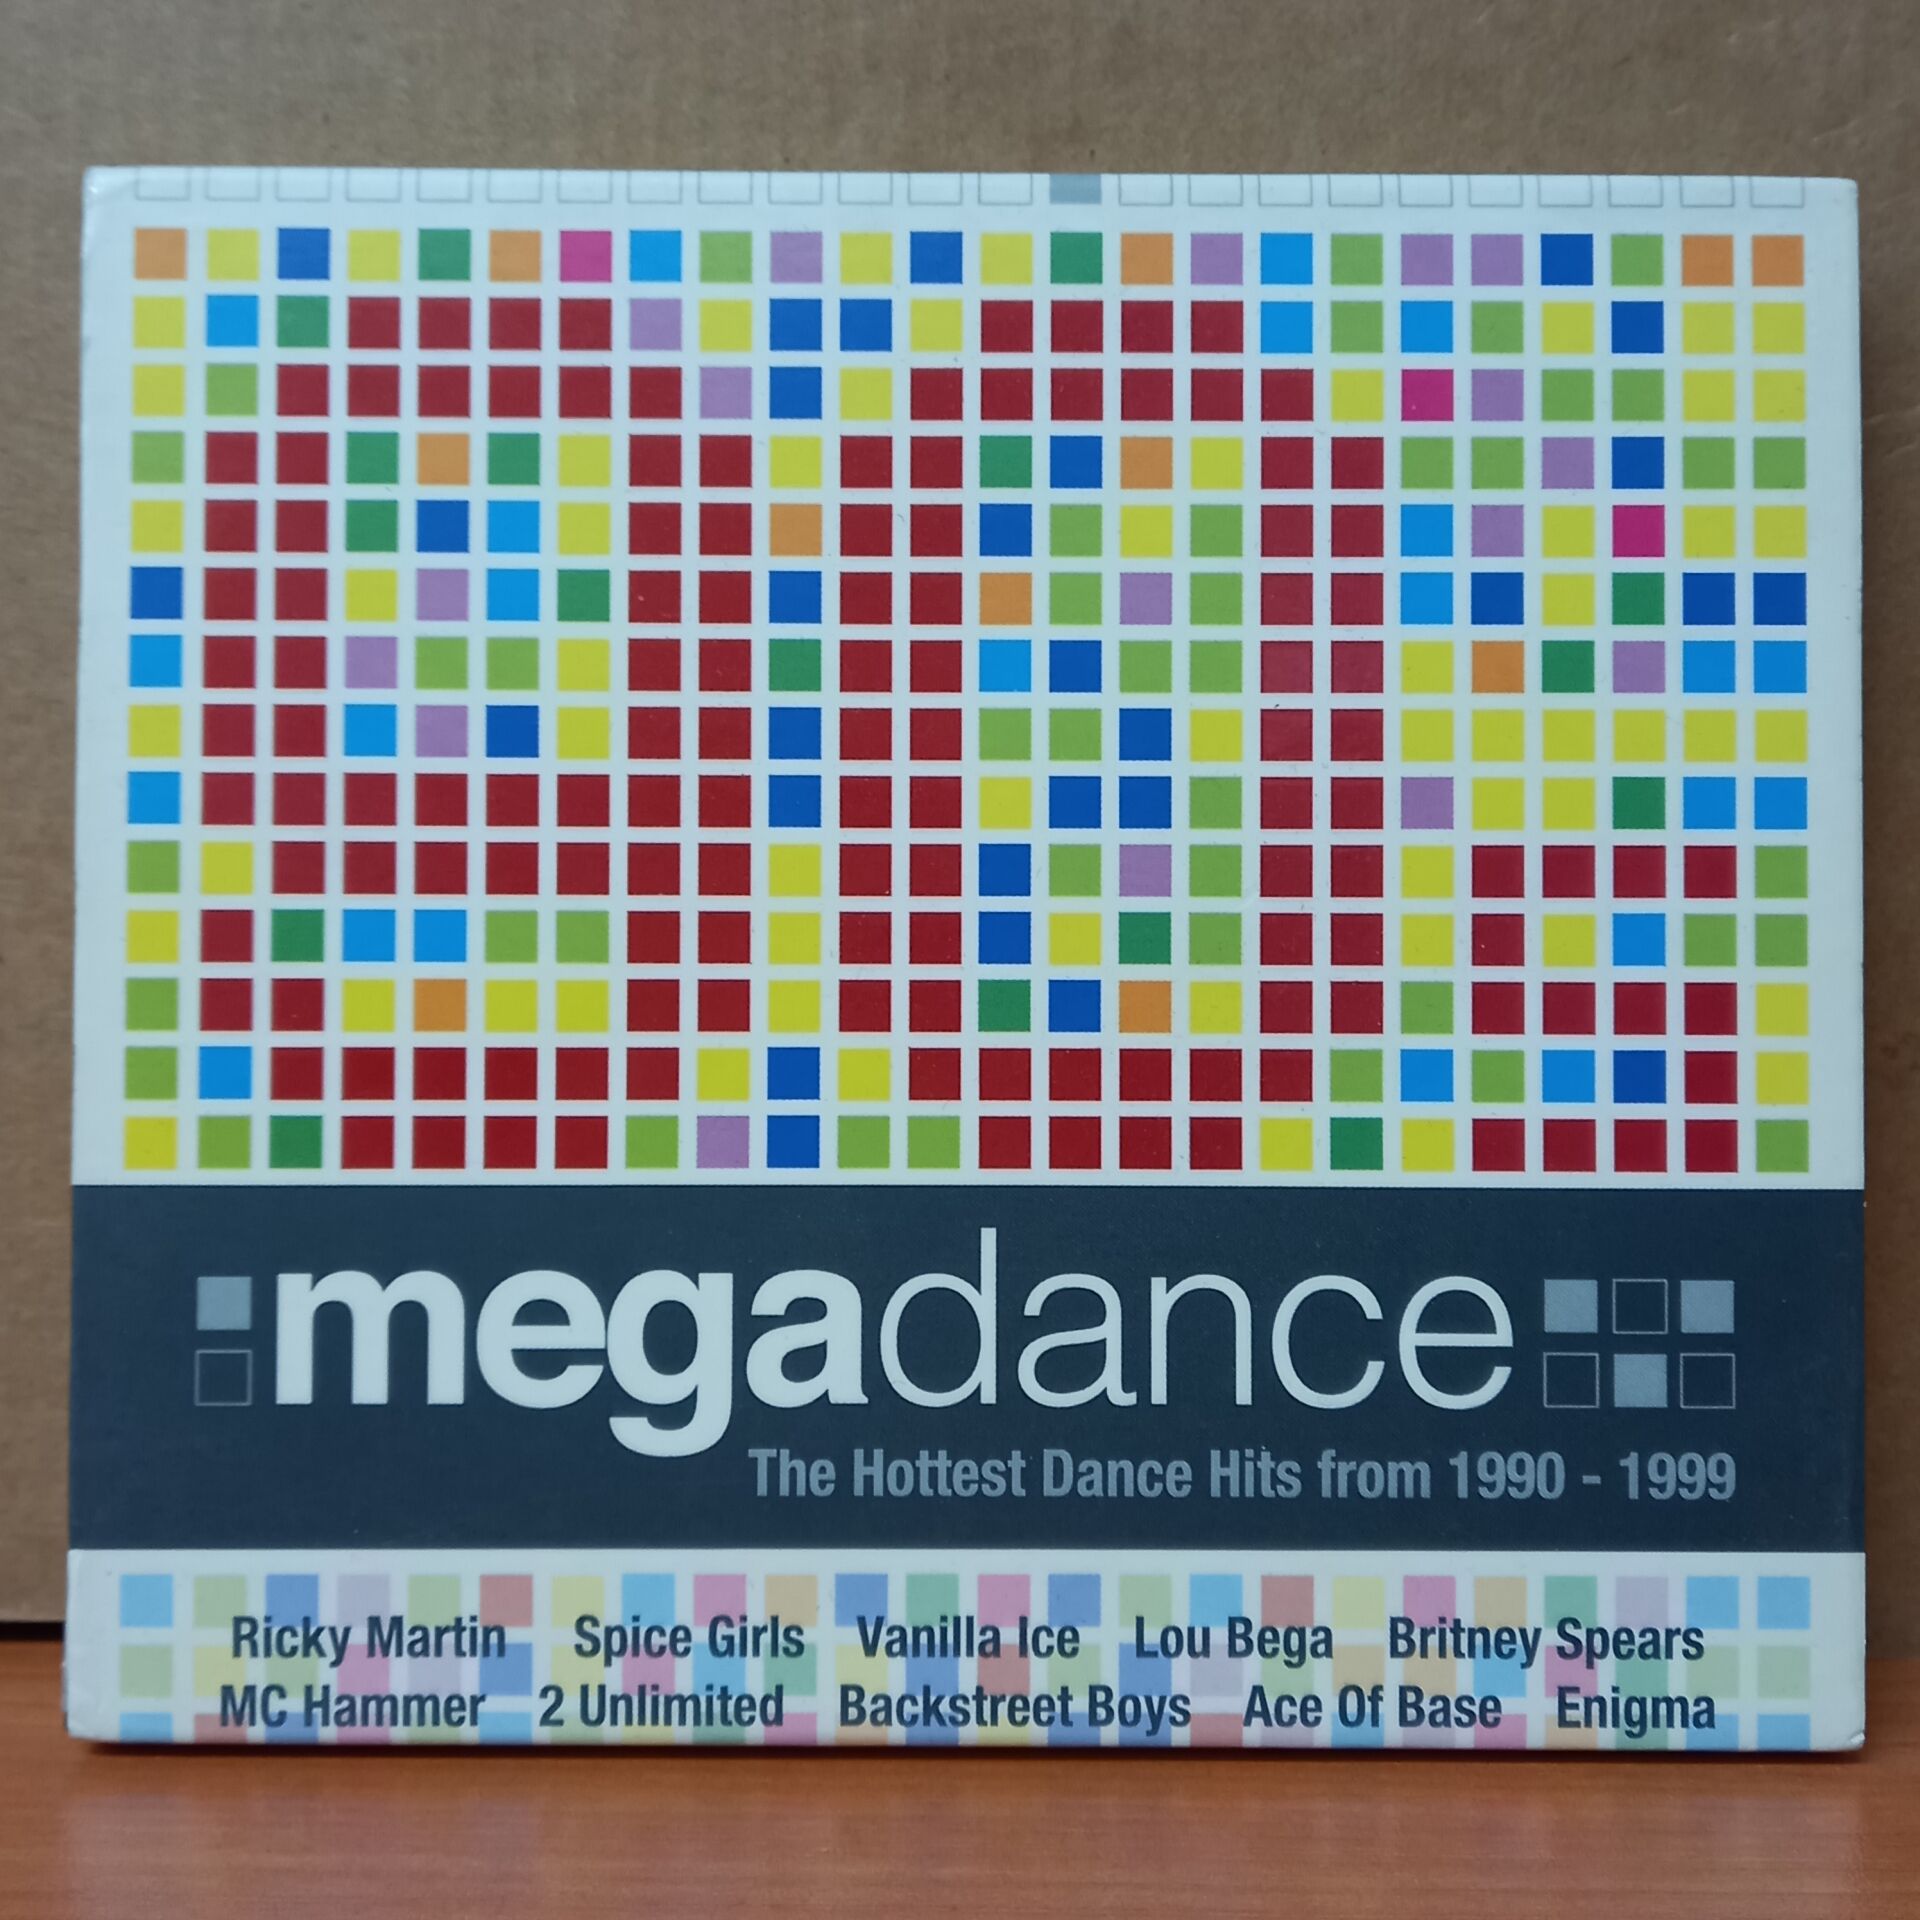 MEGA DANCE - THE HOTTEST DANCE HITS FROM 1990-1999 / RICKY MARTIN, SPICE GIRLS, VANILLA ICE, BRITNEY SPEARS (2004) - 2CD 2.EL